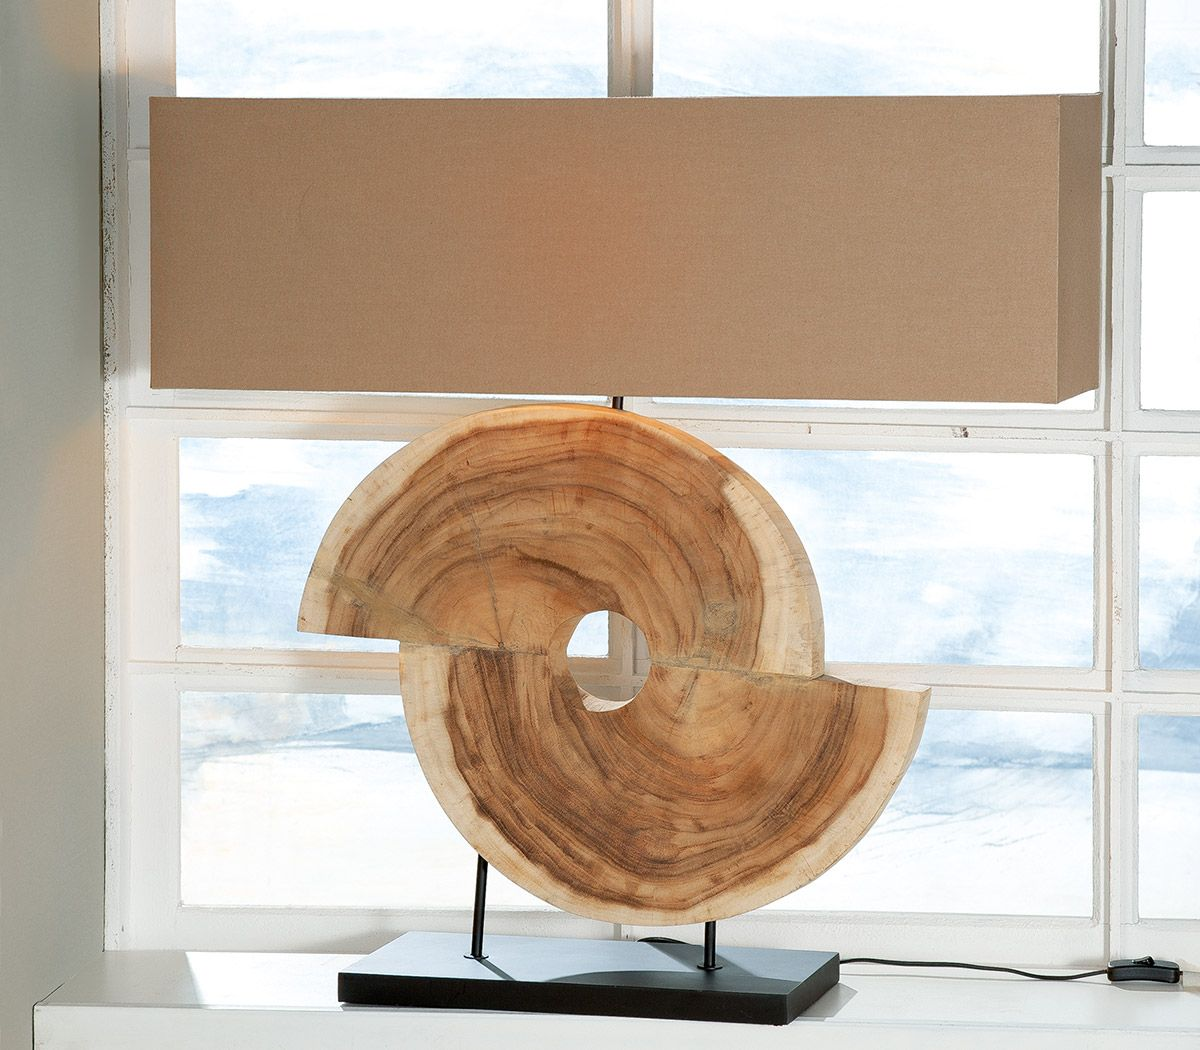 Woods Natural Table Lamp Slices